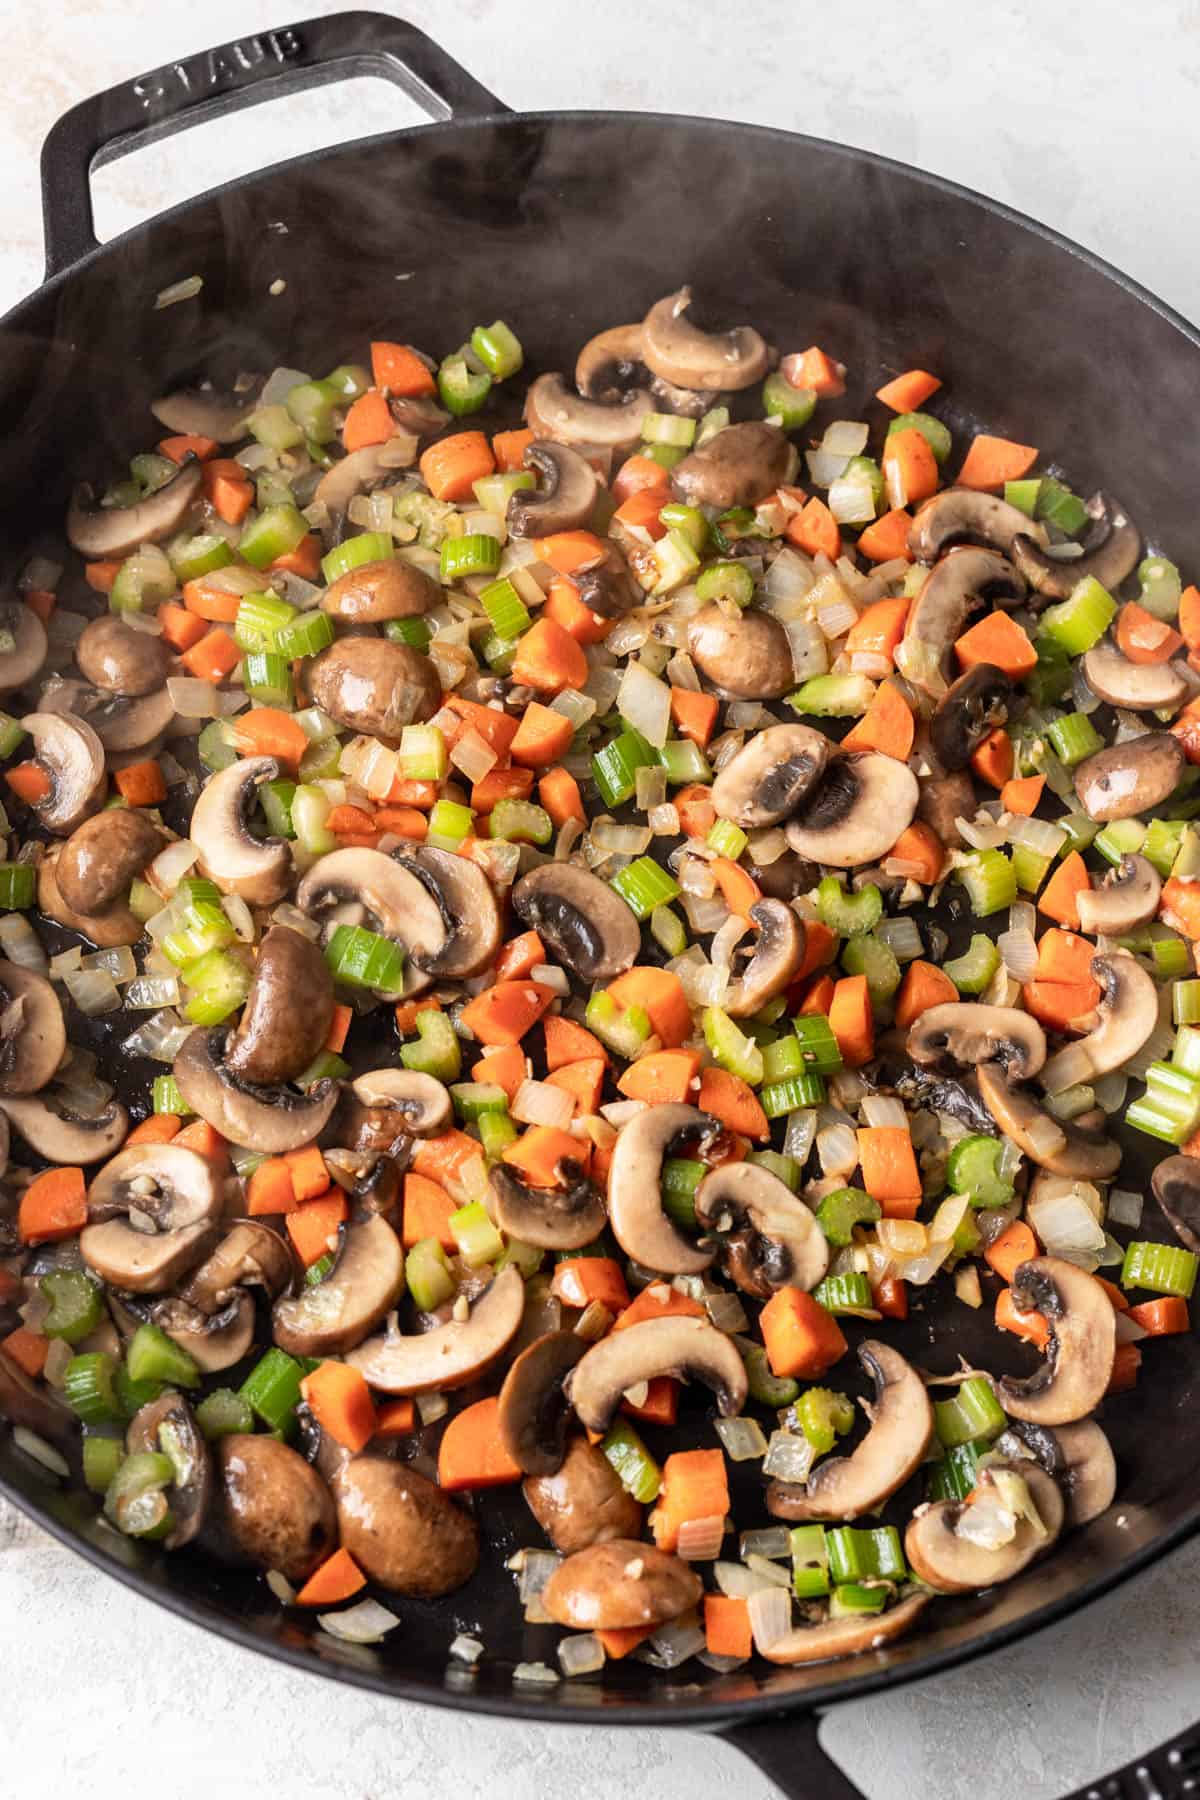 Sauteed vegetables and mushrooms in a large skillet.